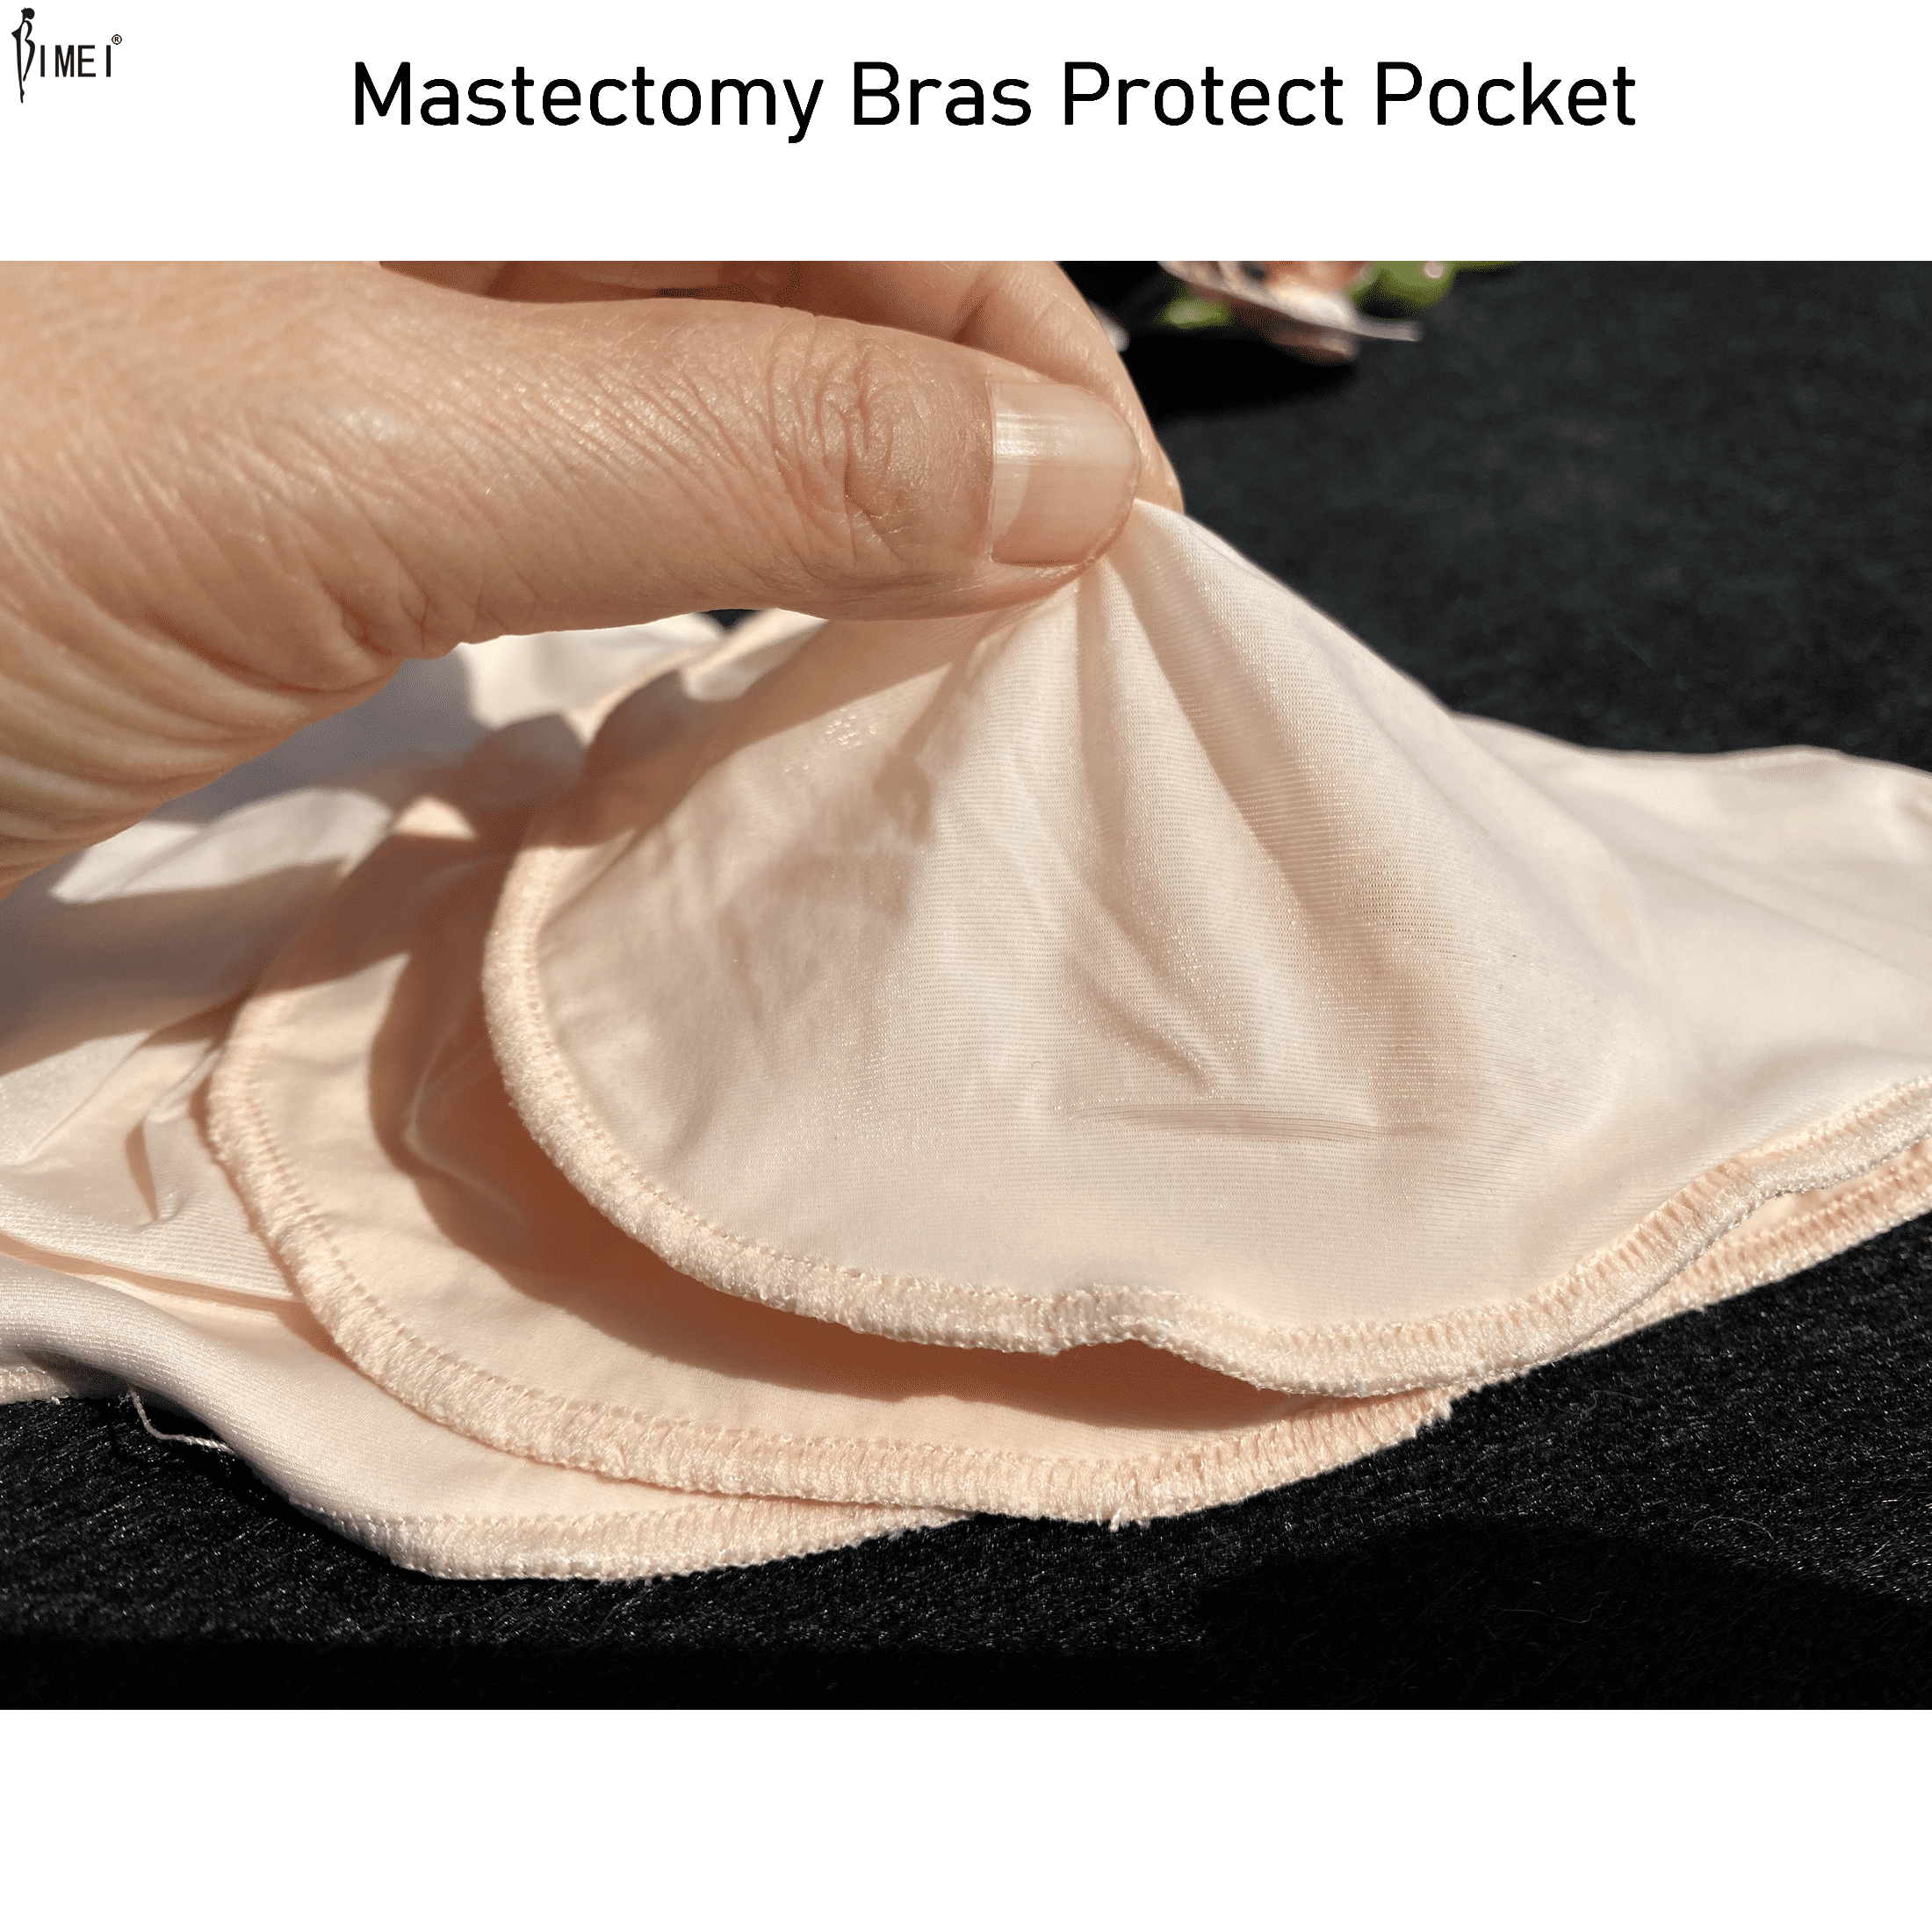 BIMEI Breathable Protect Pocket for Mastectomy Silicone Breast